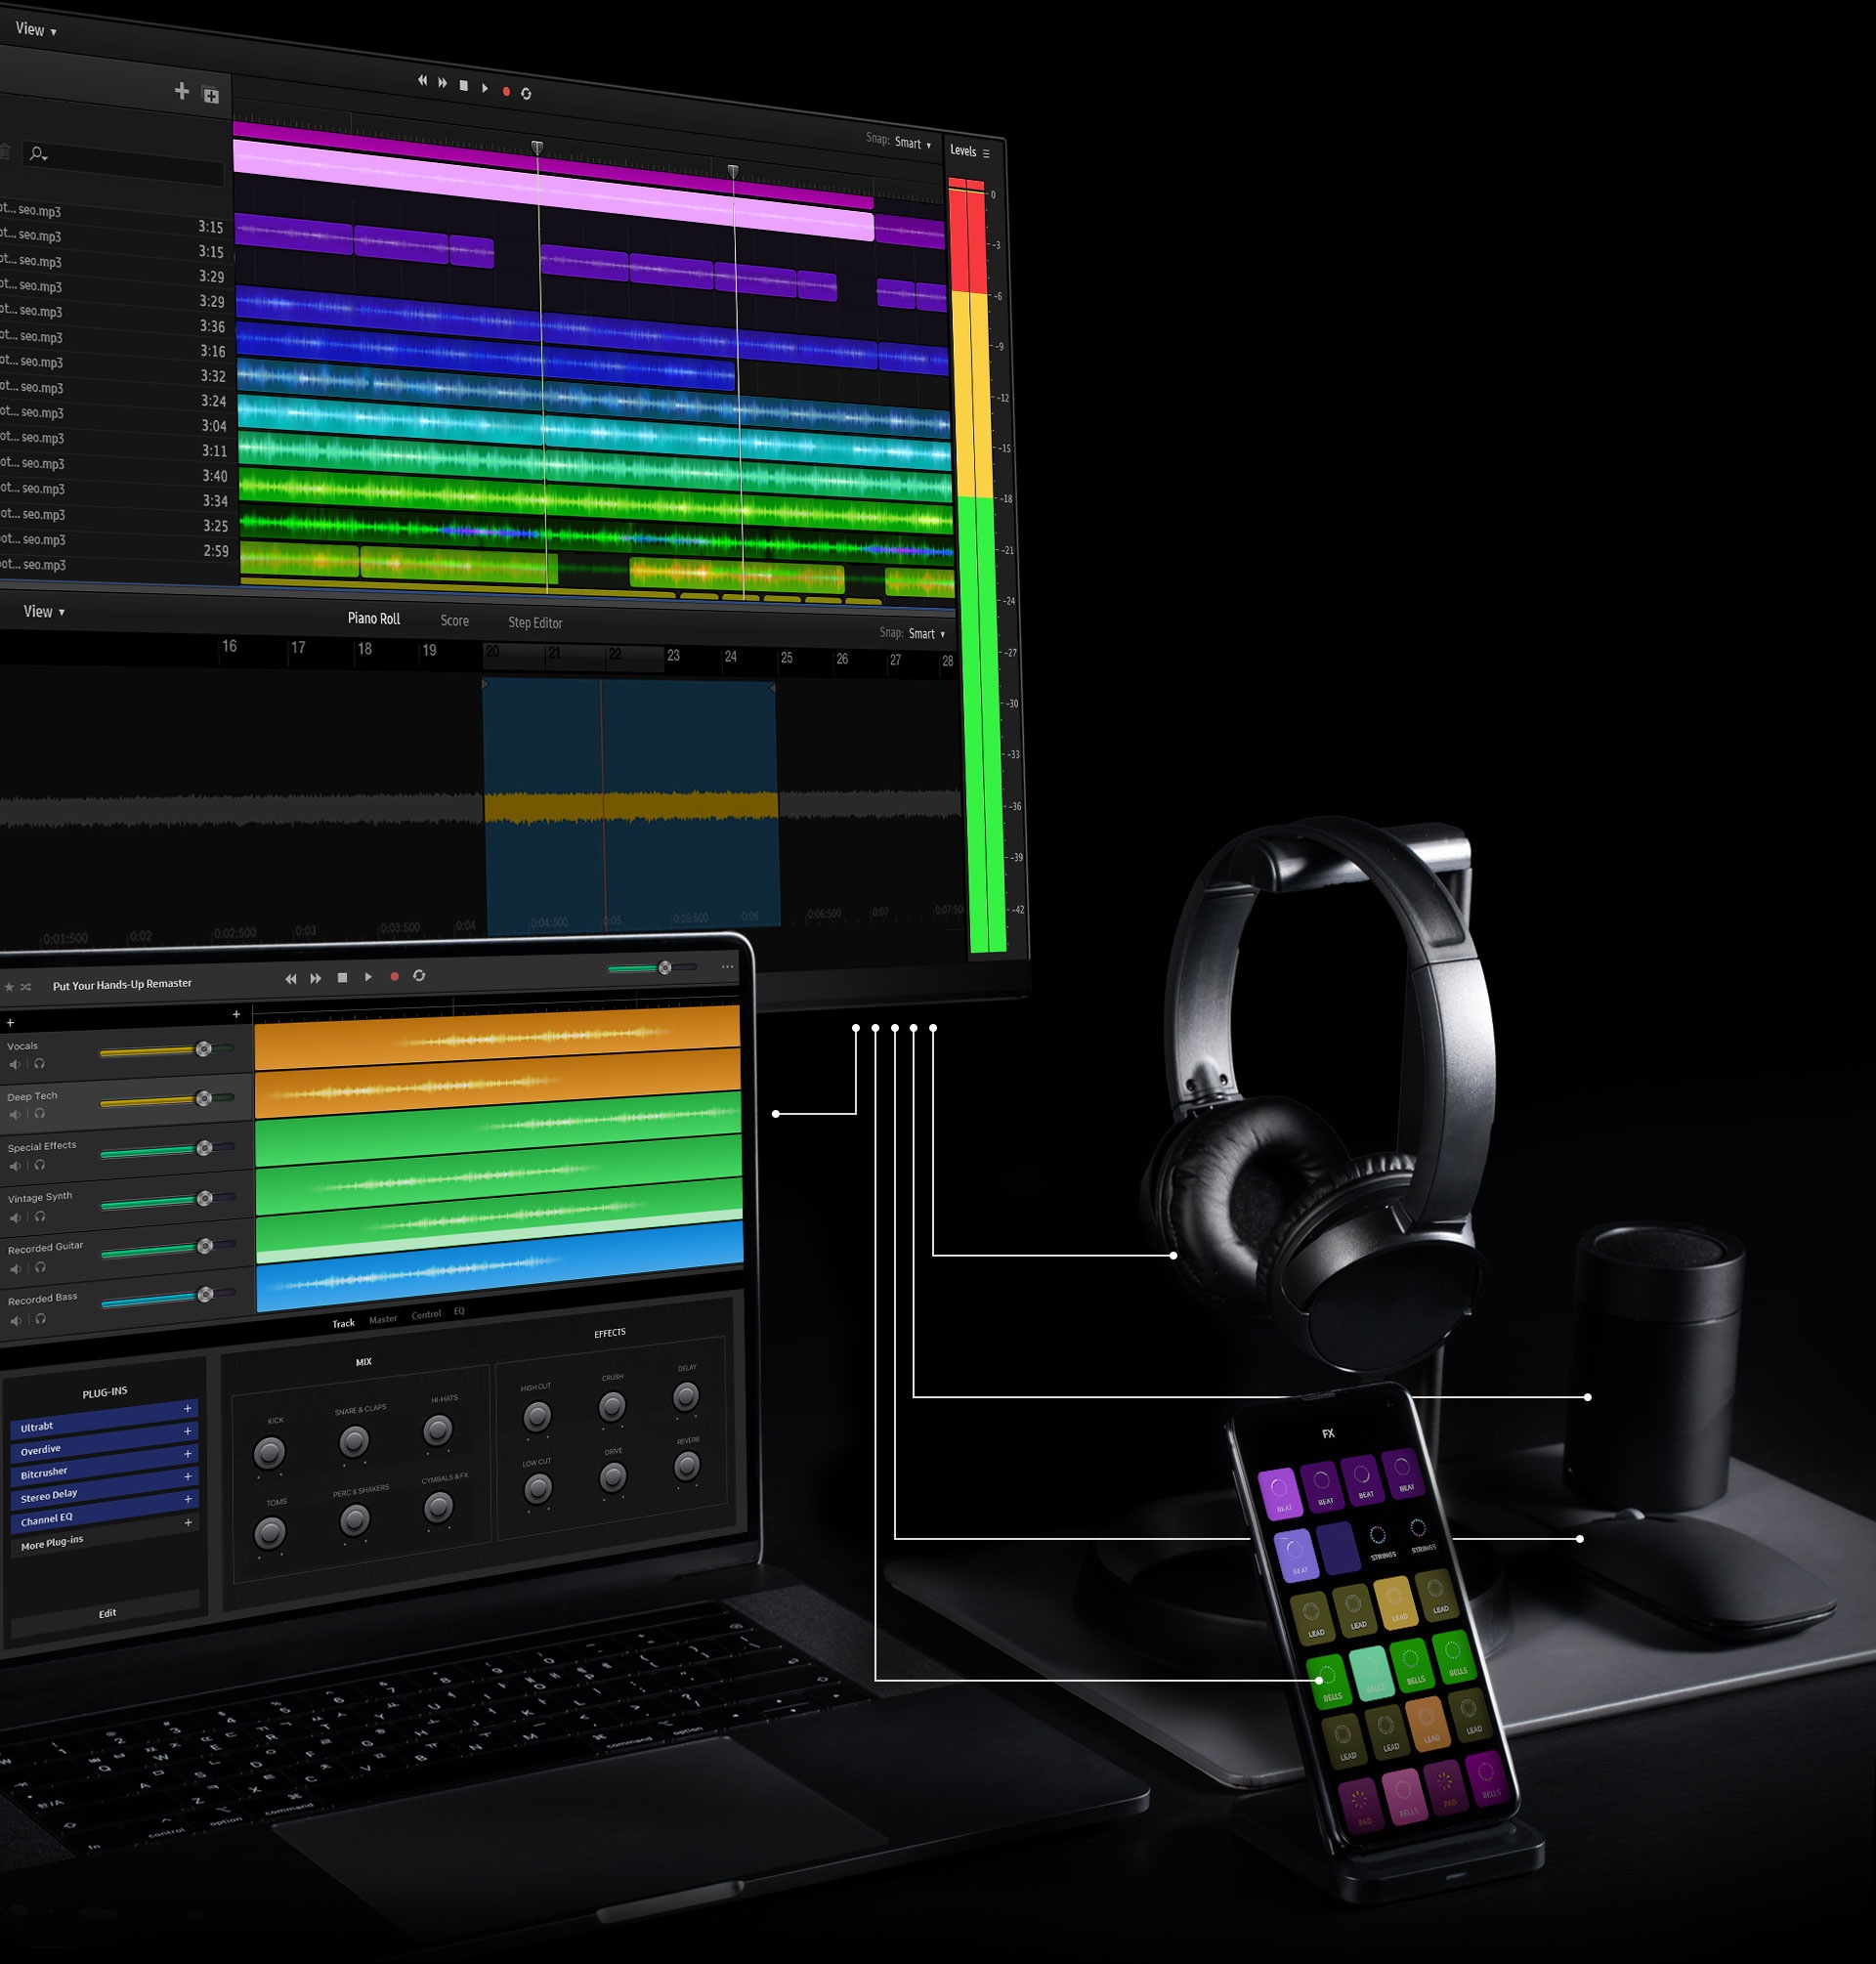 A full docking workspace setup includes monitor, laptop, mobile device, headphones, mouse and speaker. White lines show how the devices can all connect together via the monitor. On the screen of the monitor is music editing software, showing multiple layers of a music track in green, blue, pink and purple colours. On the screen of the laptop, which is placed just below the monitor, shows a different music editing software. This shows additional music track layers in blue, green and orange colours. The mobile device, placed to the right of the monitor and laptop, shows multiple filter options in purple, khaki green, beige and brown colours.